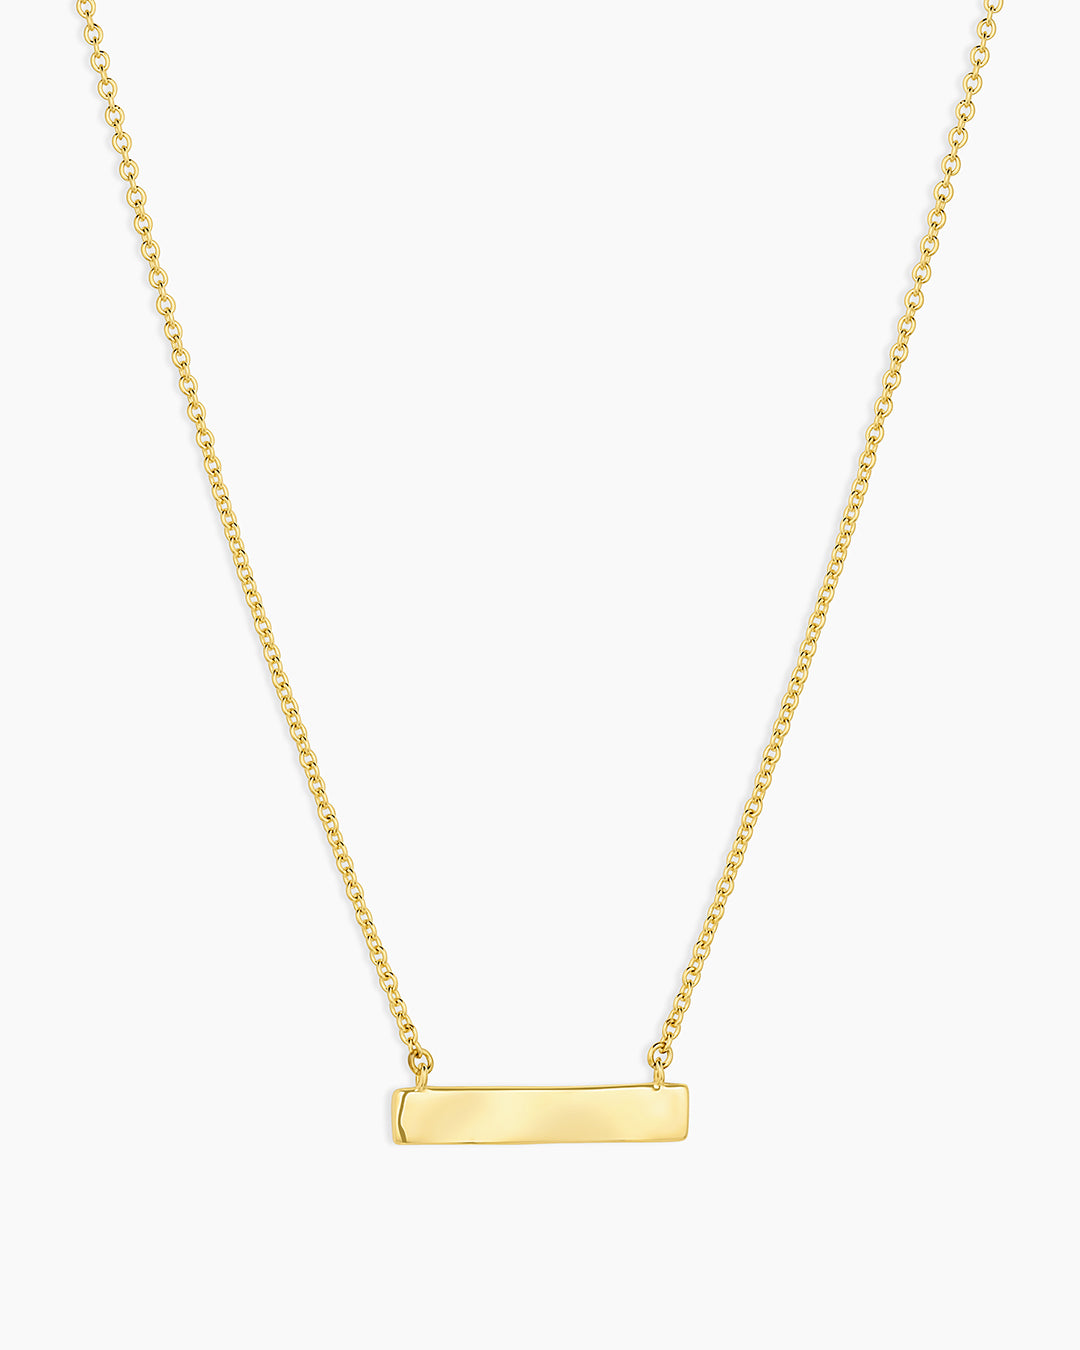 Personalized Bar Necklace | Alexis Russell